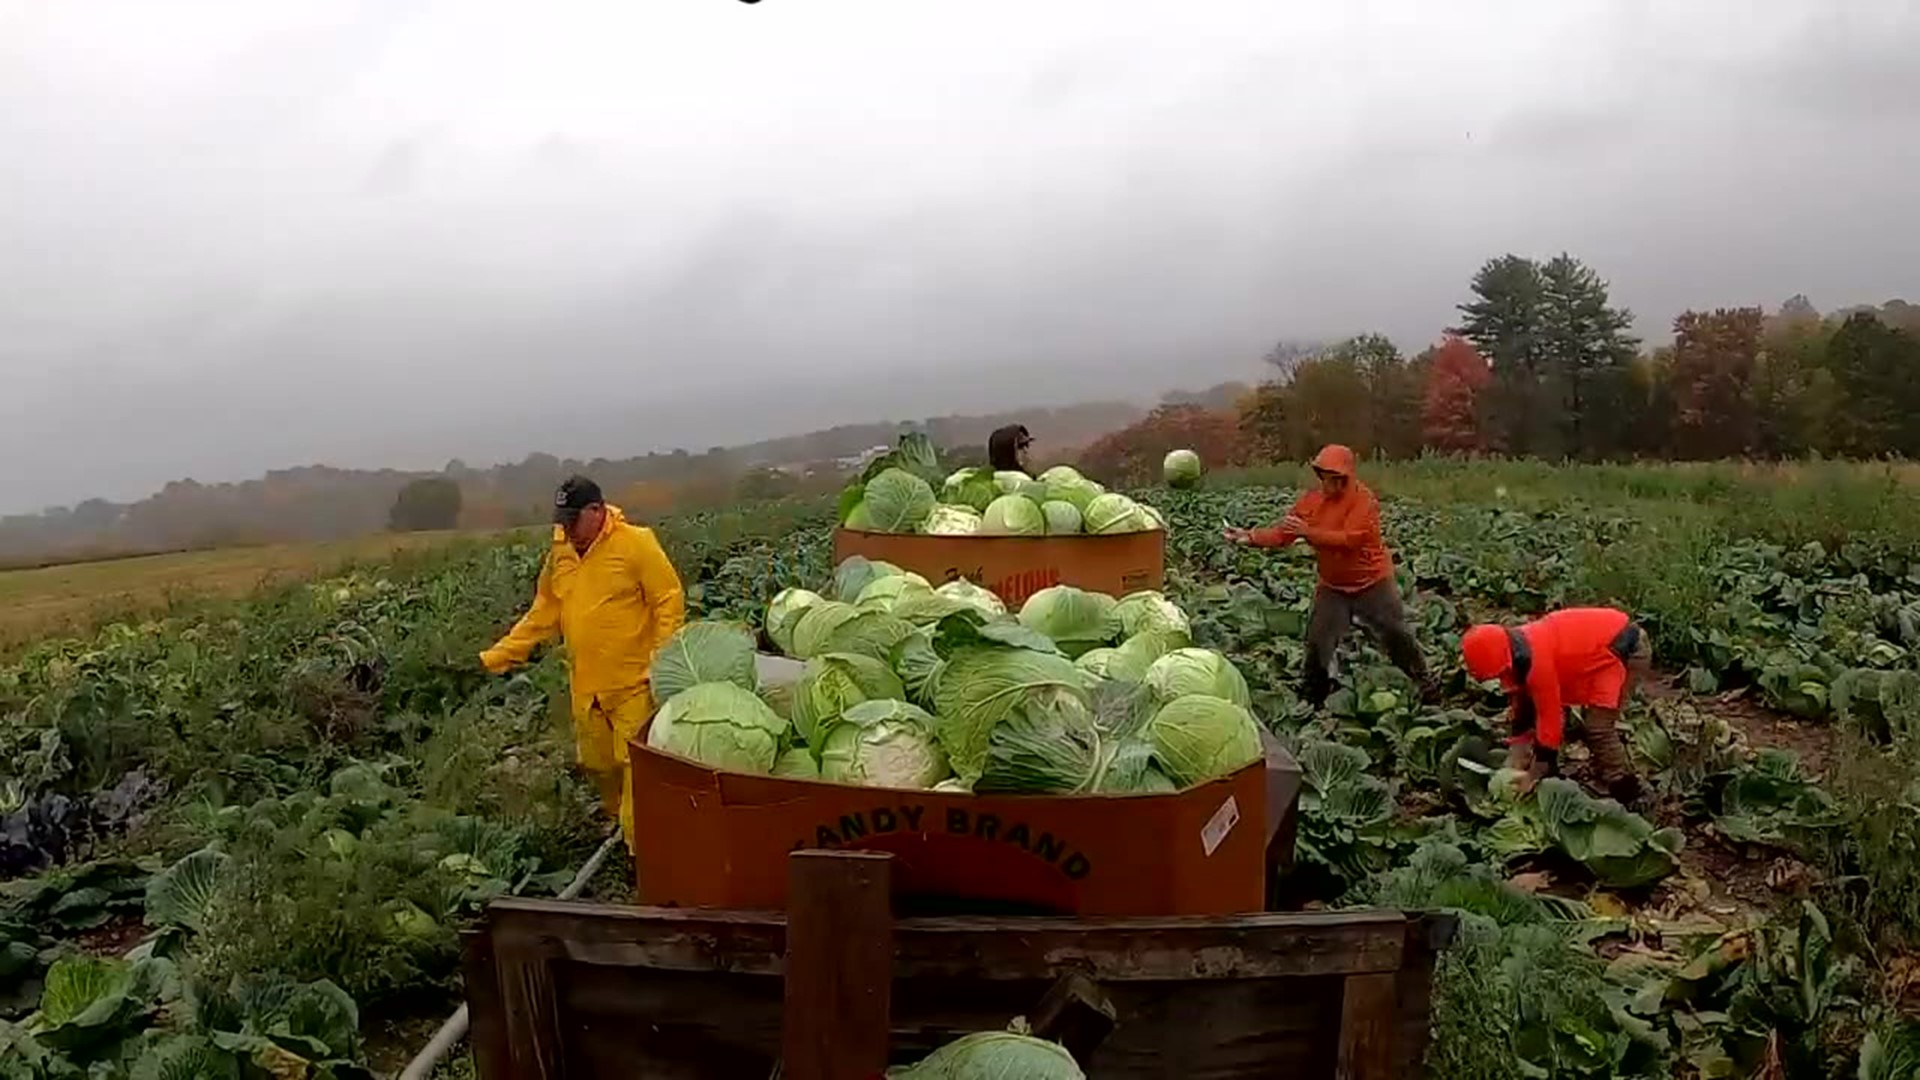 A few years ago, Andrew Ochs started posting Veggie Boys videos just as a way to teach others about how his family grows vegetables.